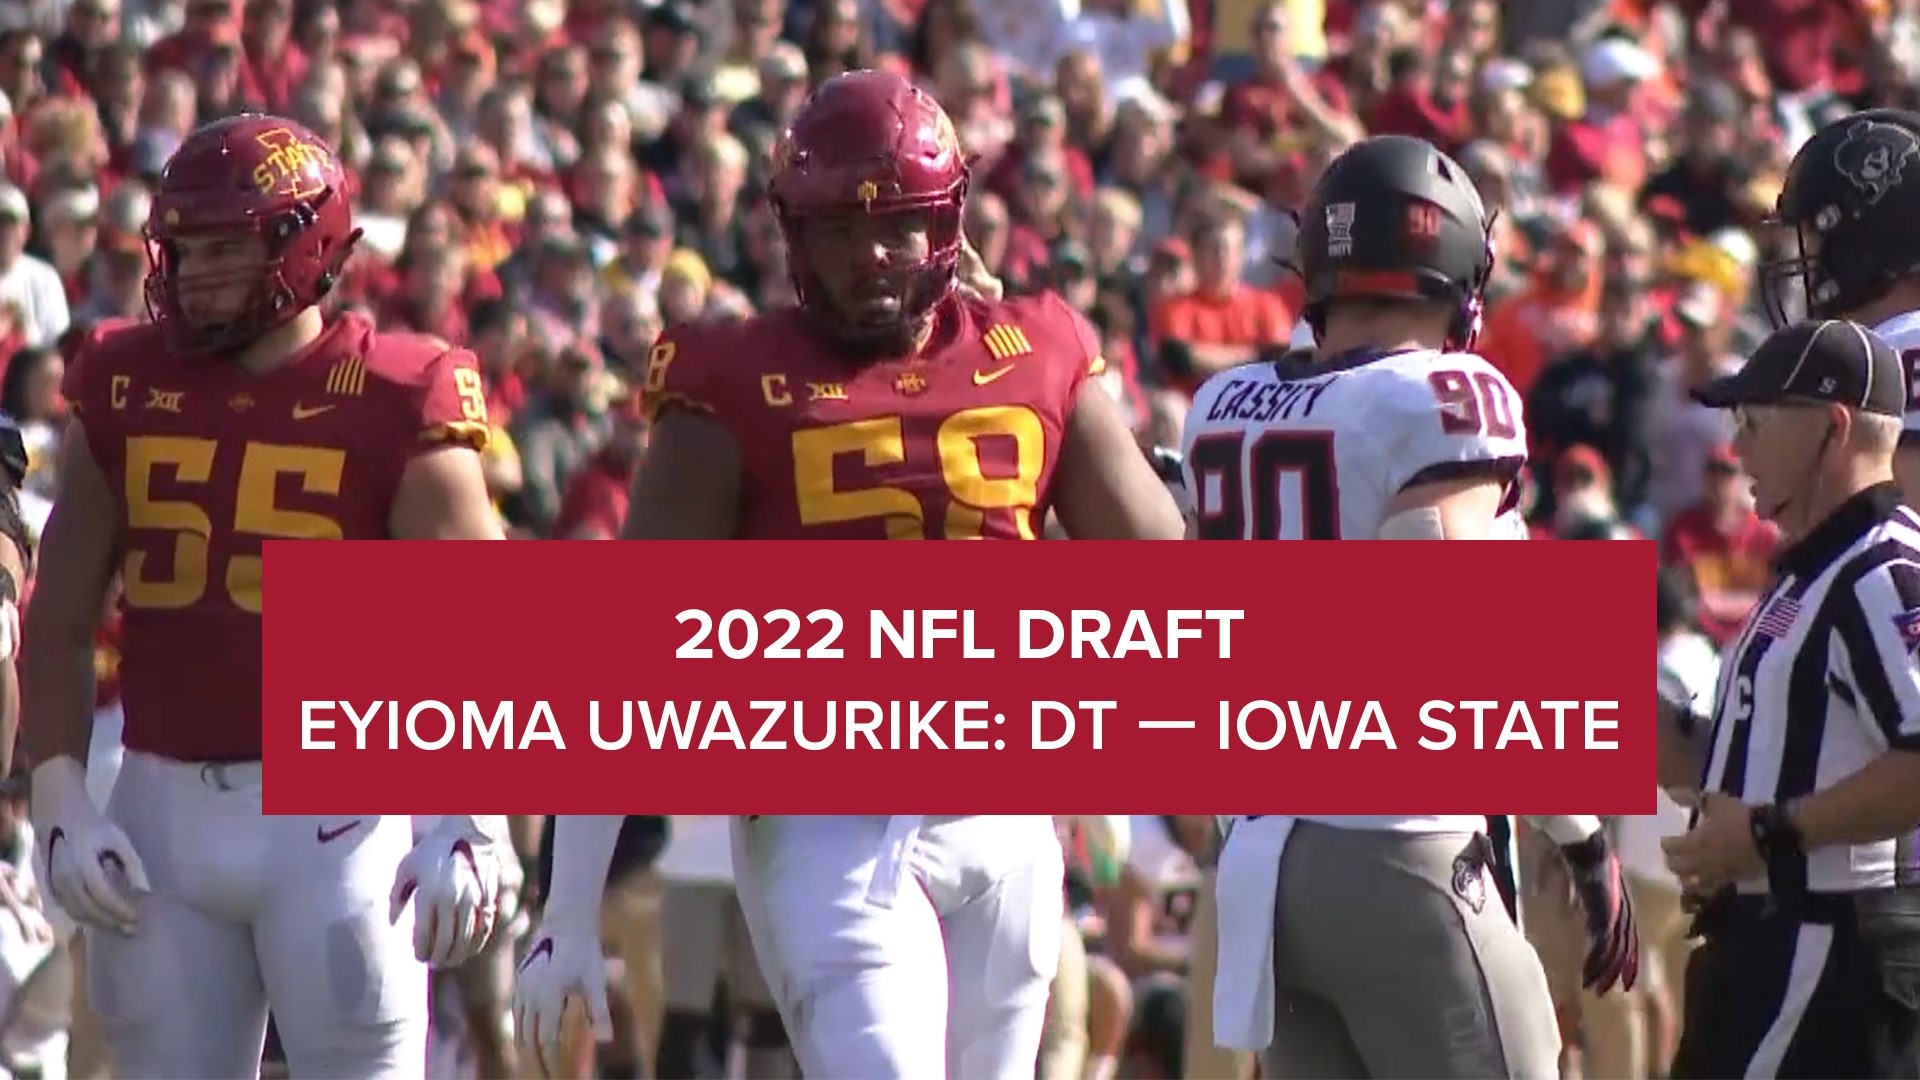 2021 marked Eyioma Uwazurike's strongest year in the cardinal and gold: 42 total tackles, nine sacks and named First Team All-Big 12 by the conference's coaches.